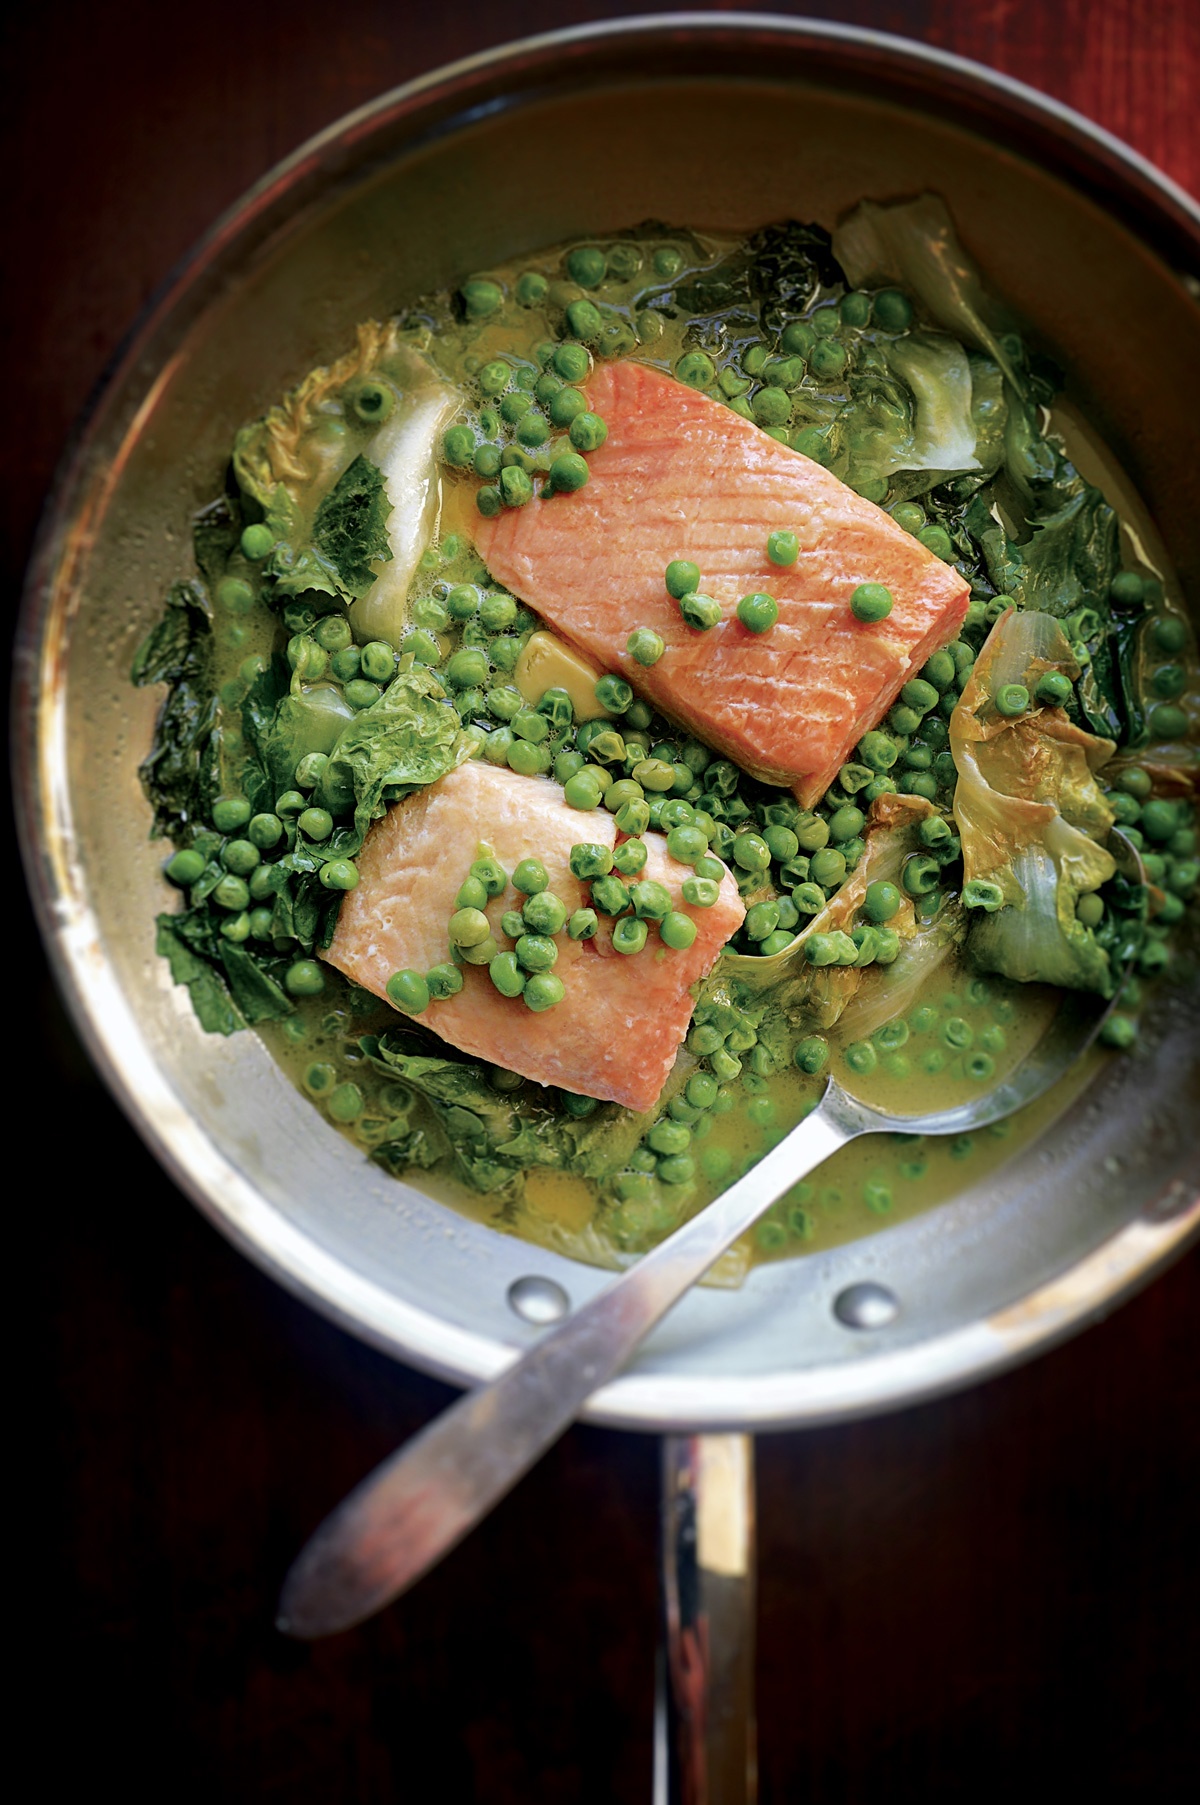 Image of Christopher Hirsheimer and Melissa Hamilton's Braised Salmon with Escarole and Peas